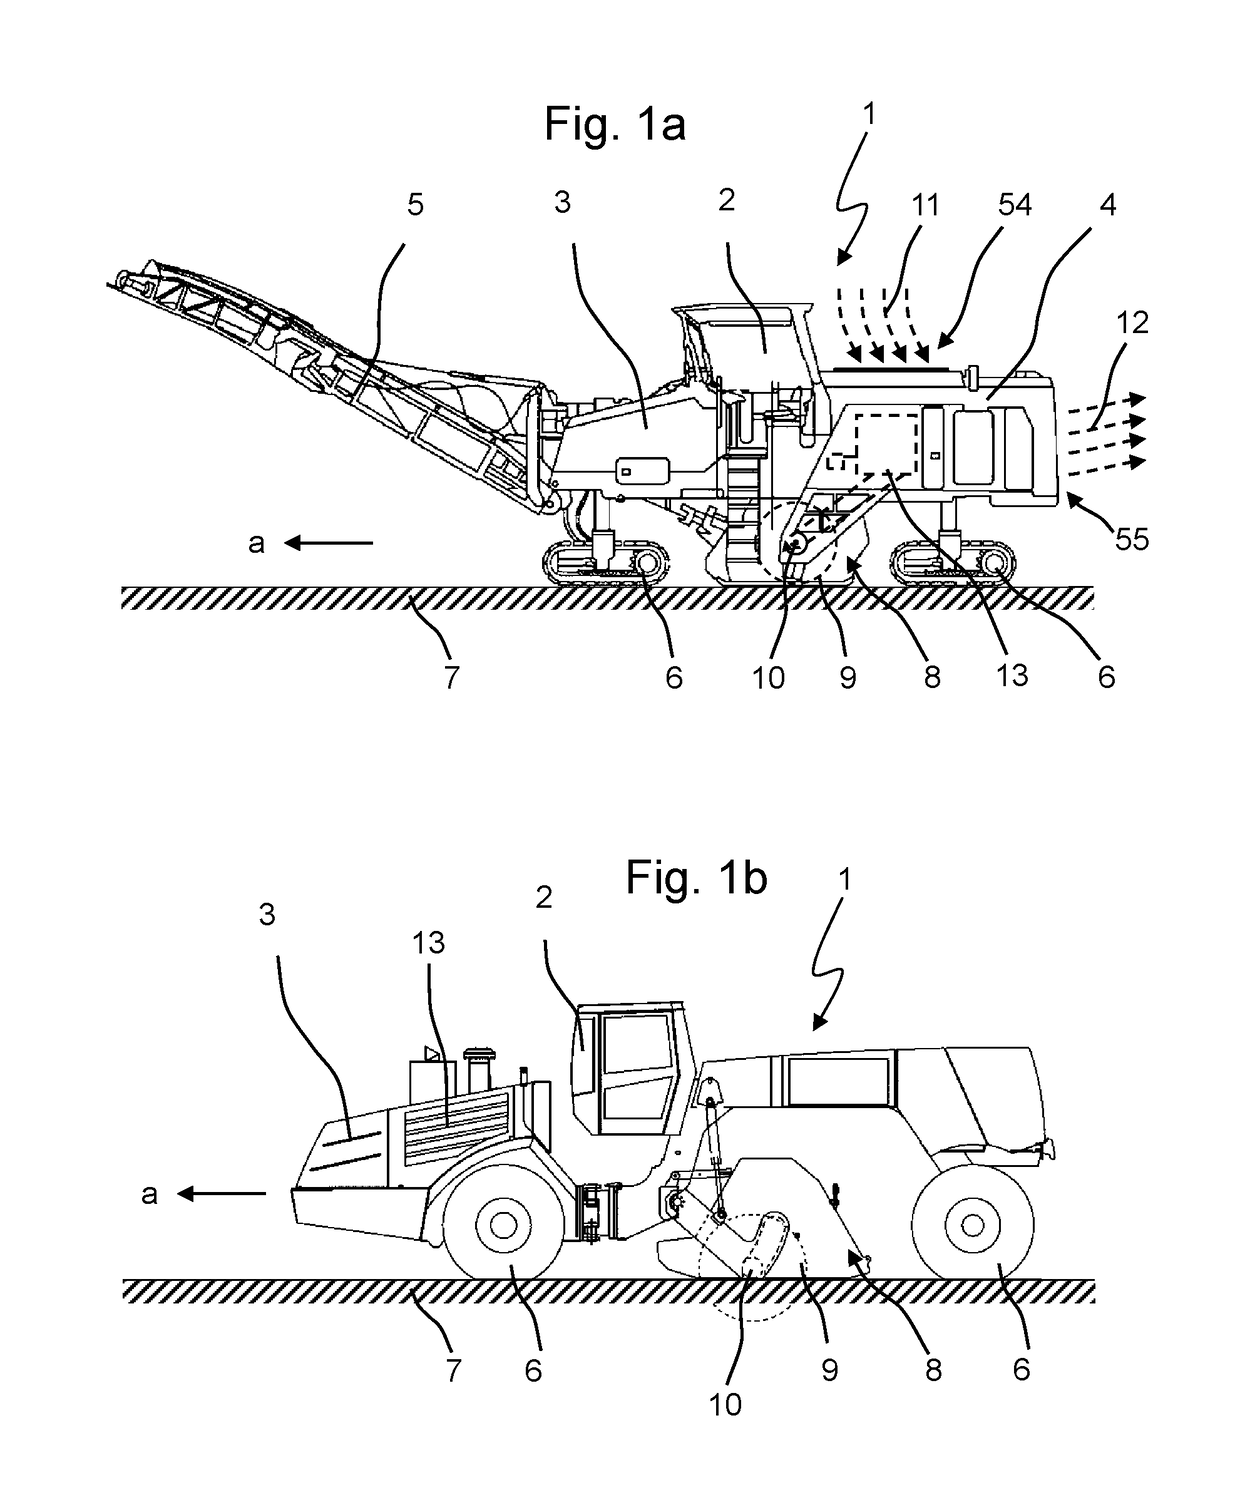 Ground milling machine having a cooling system, cooling system, and method for cooling a ground milling machine